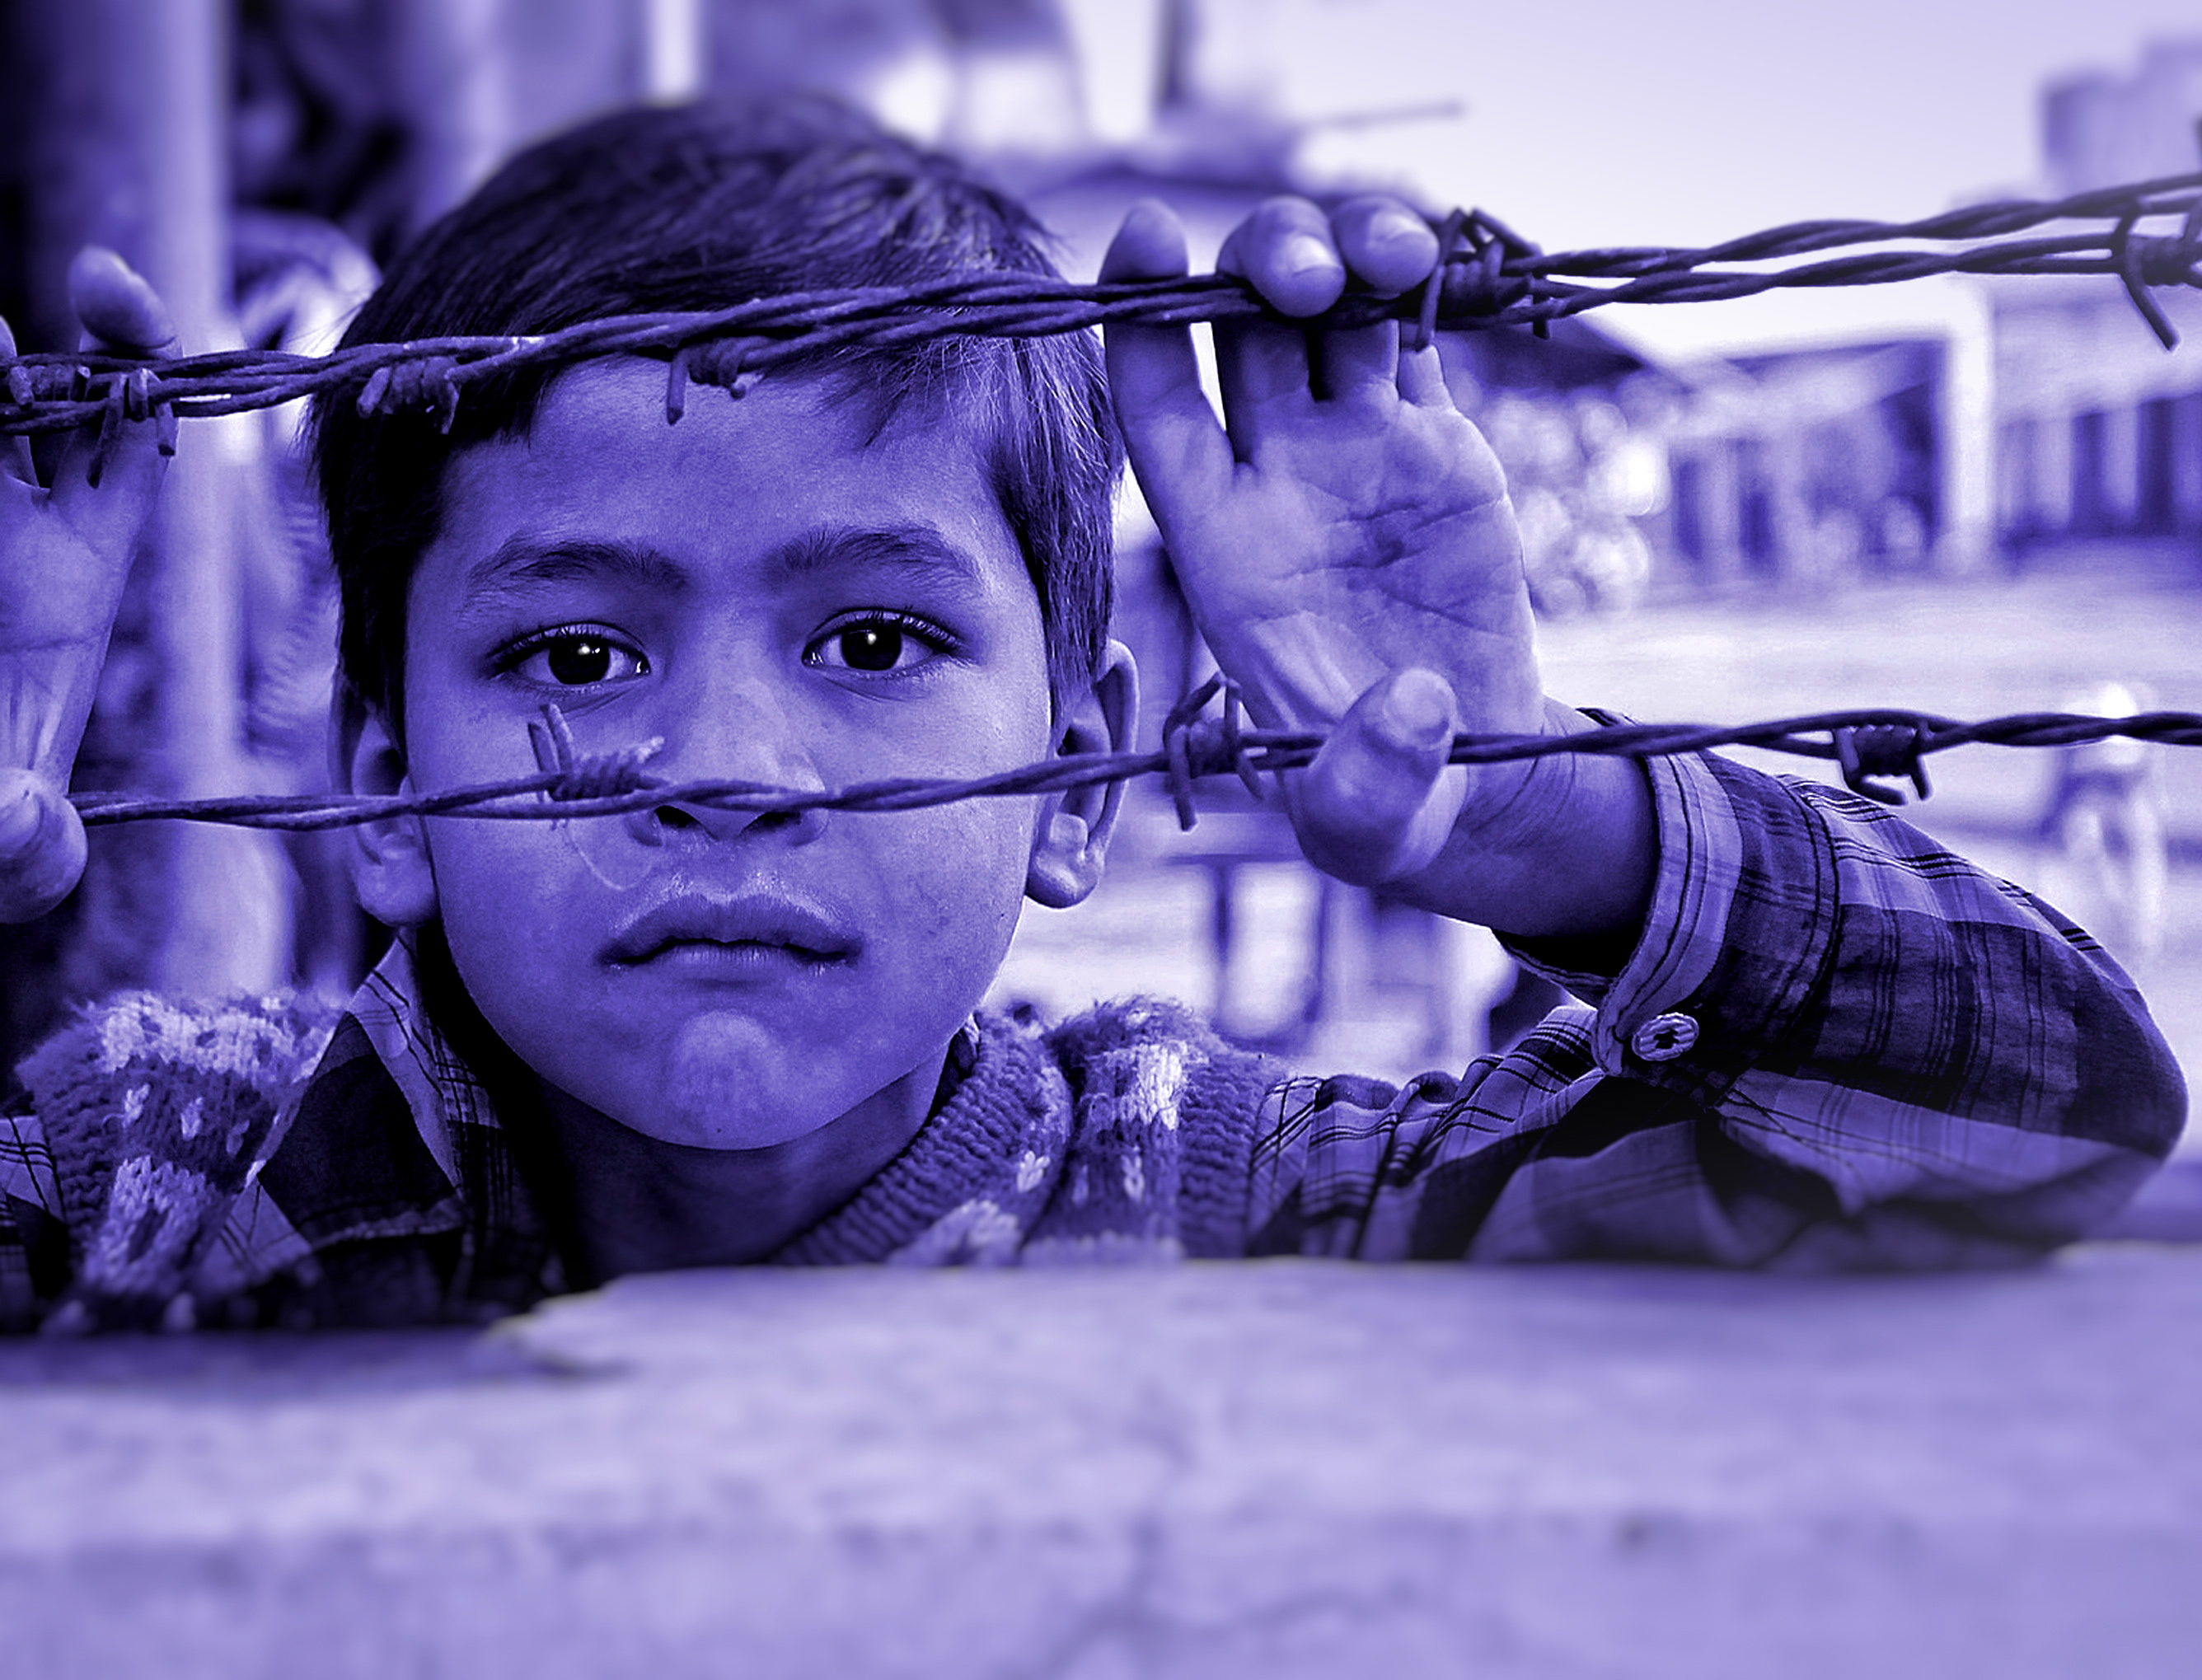 Child and barbed wire photo